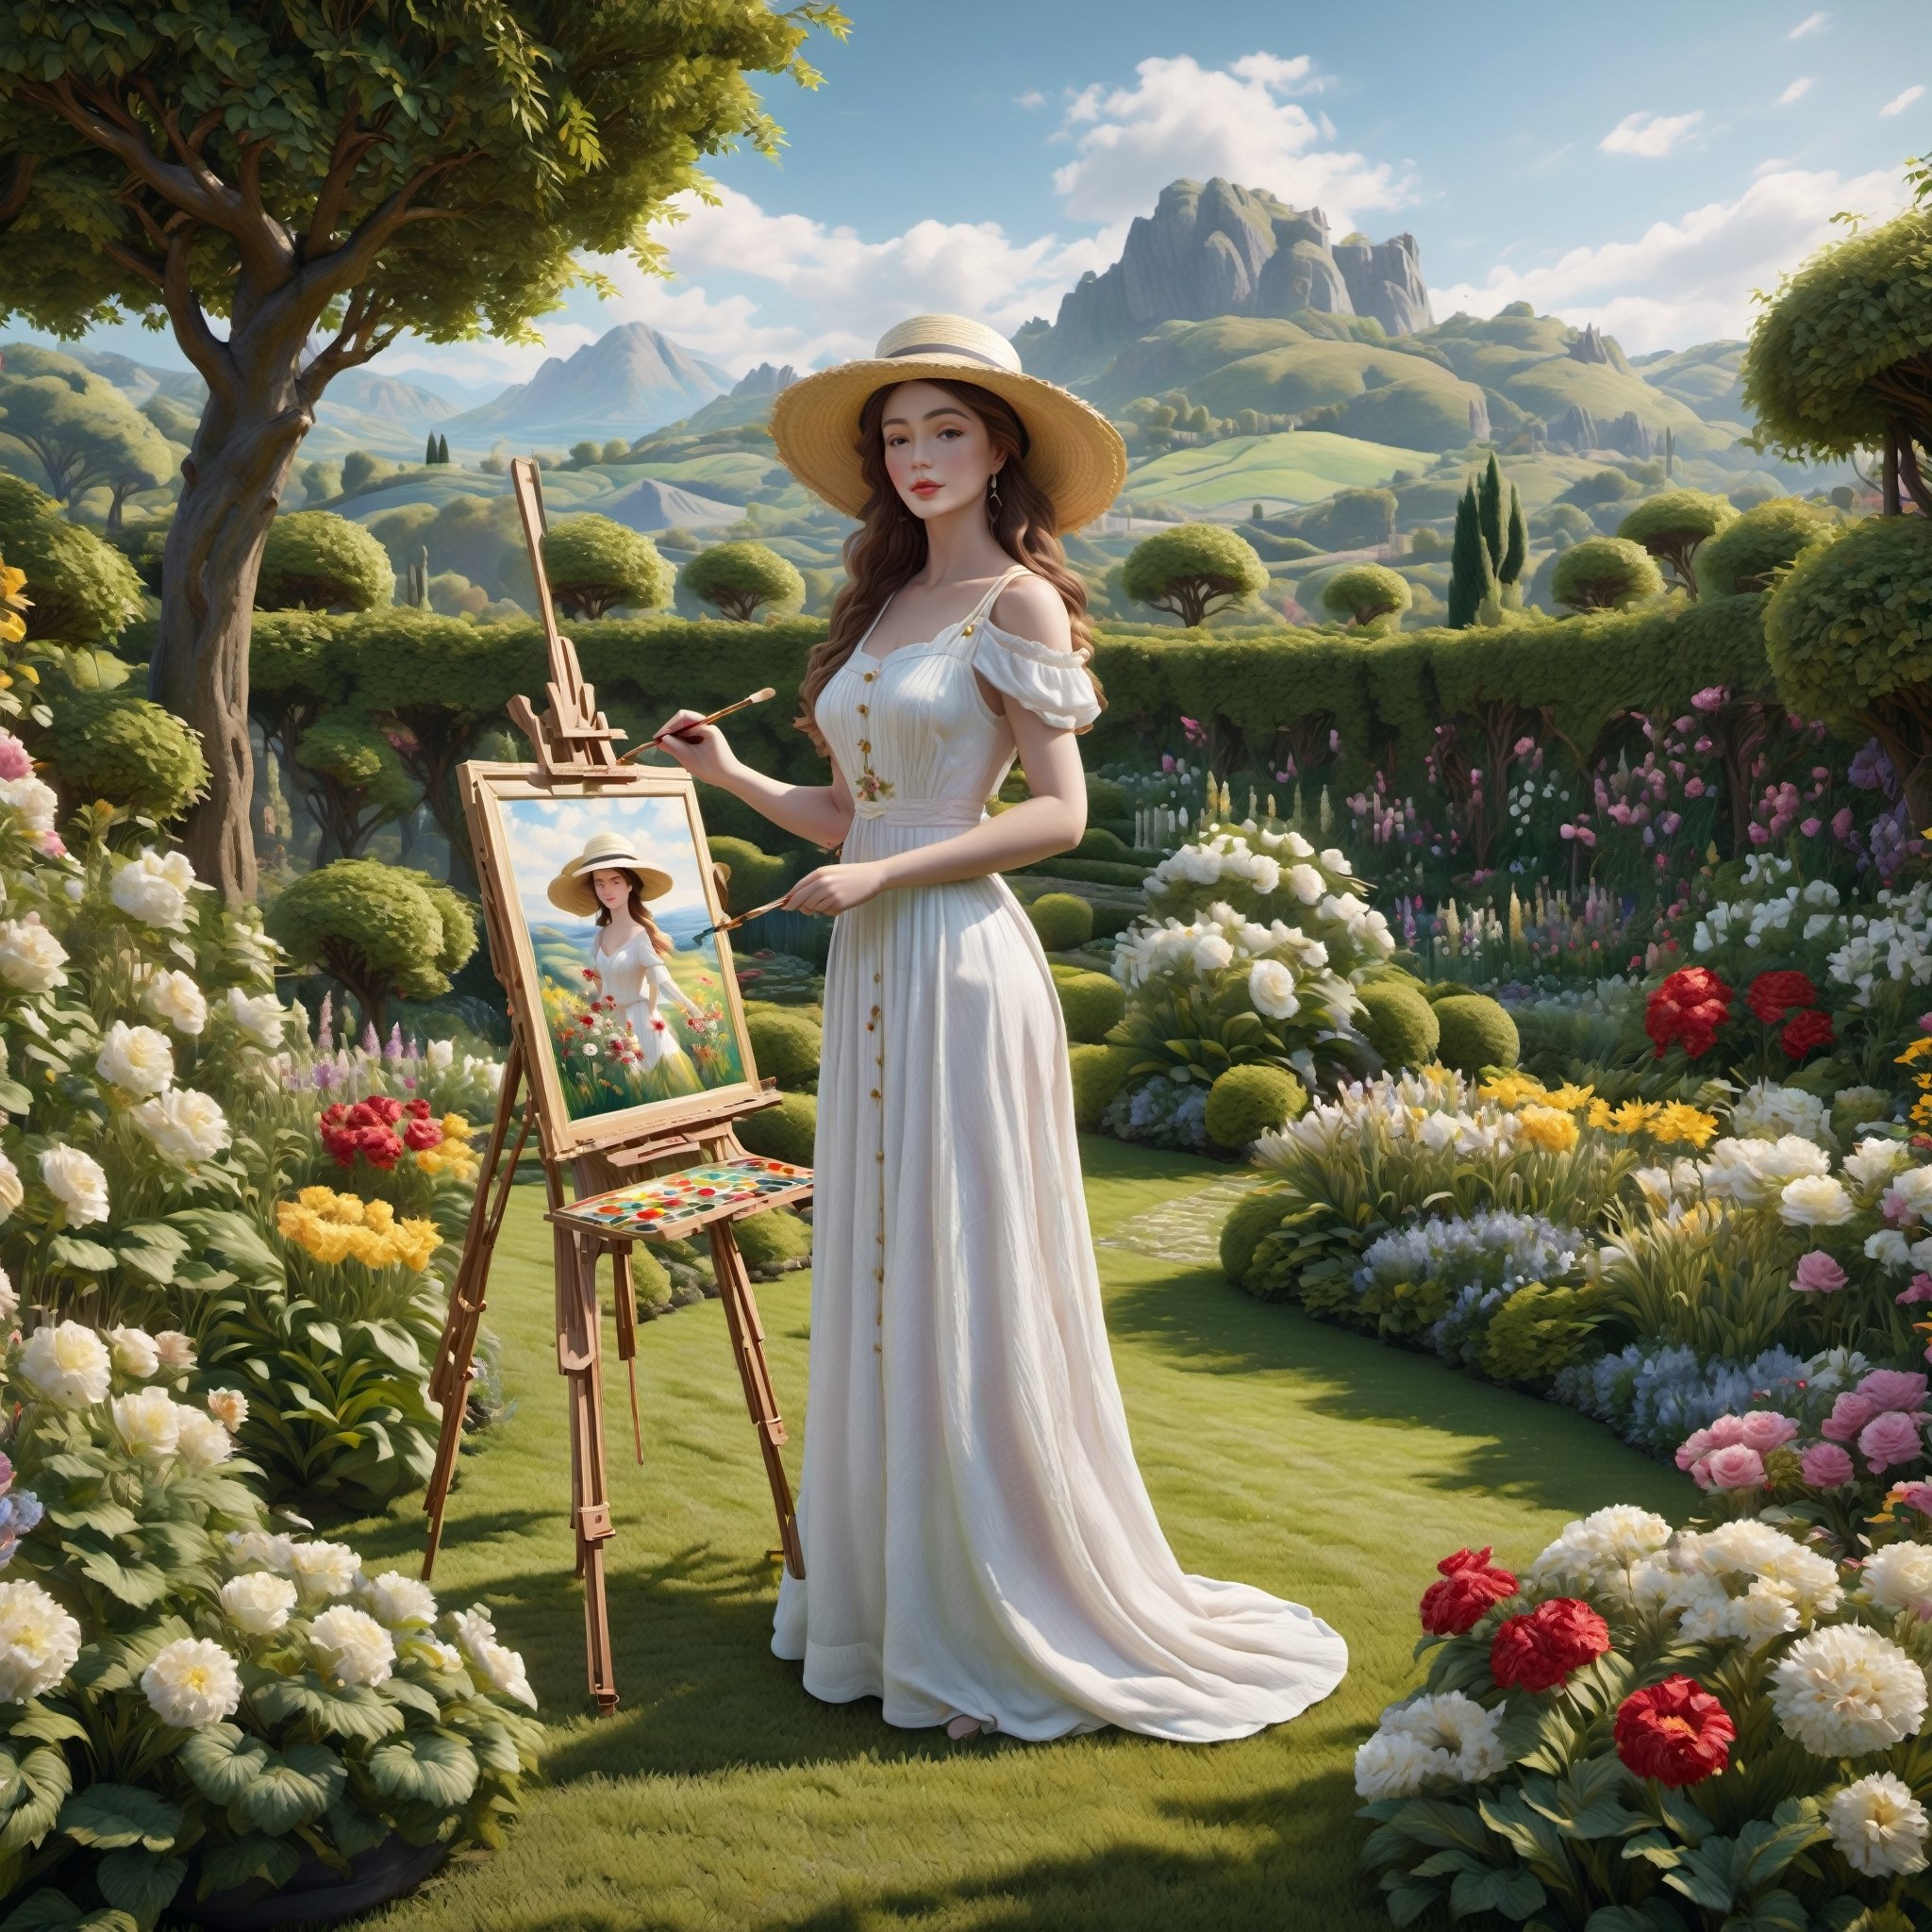 (masterpiece),  An image of a woman standing in a garden,  wearing a white dress and a straw hat,  painting a picture with an easel and brush,  the image is 8k quality